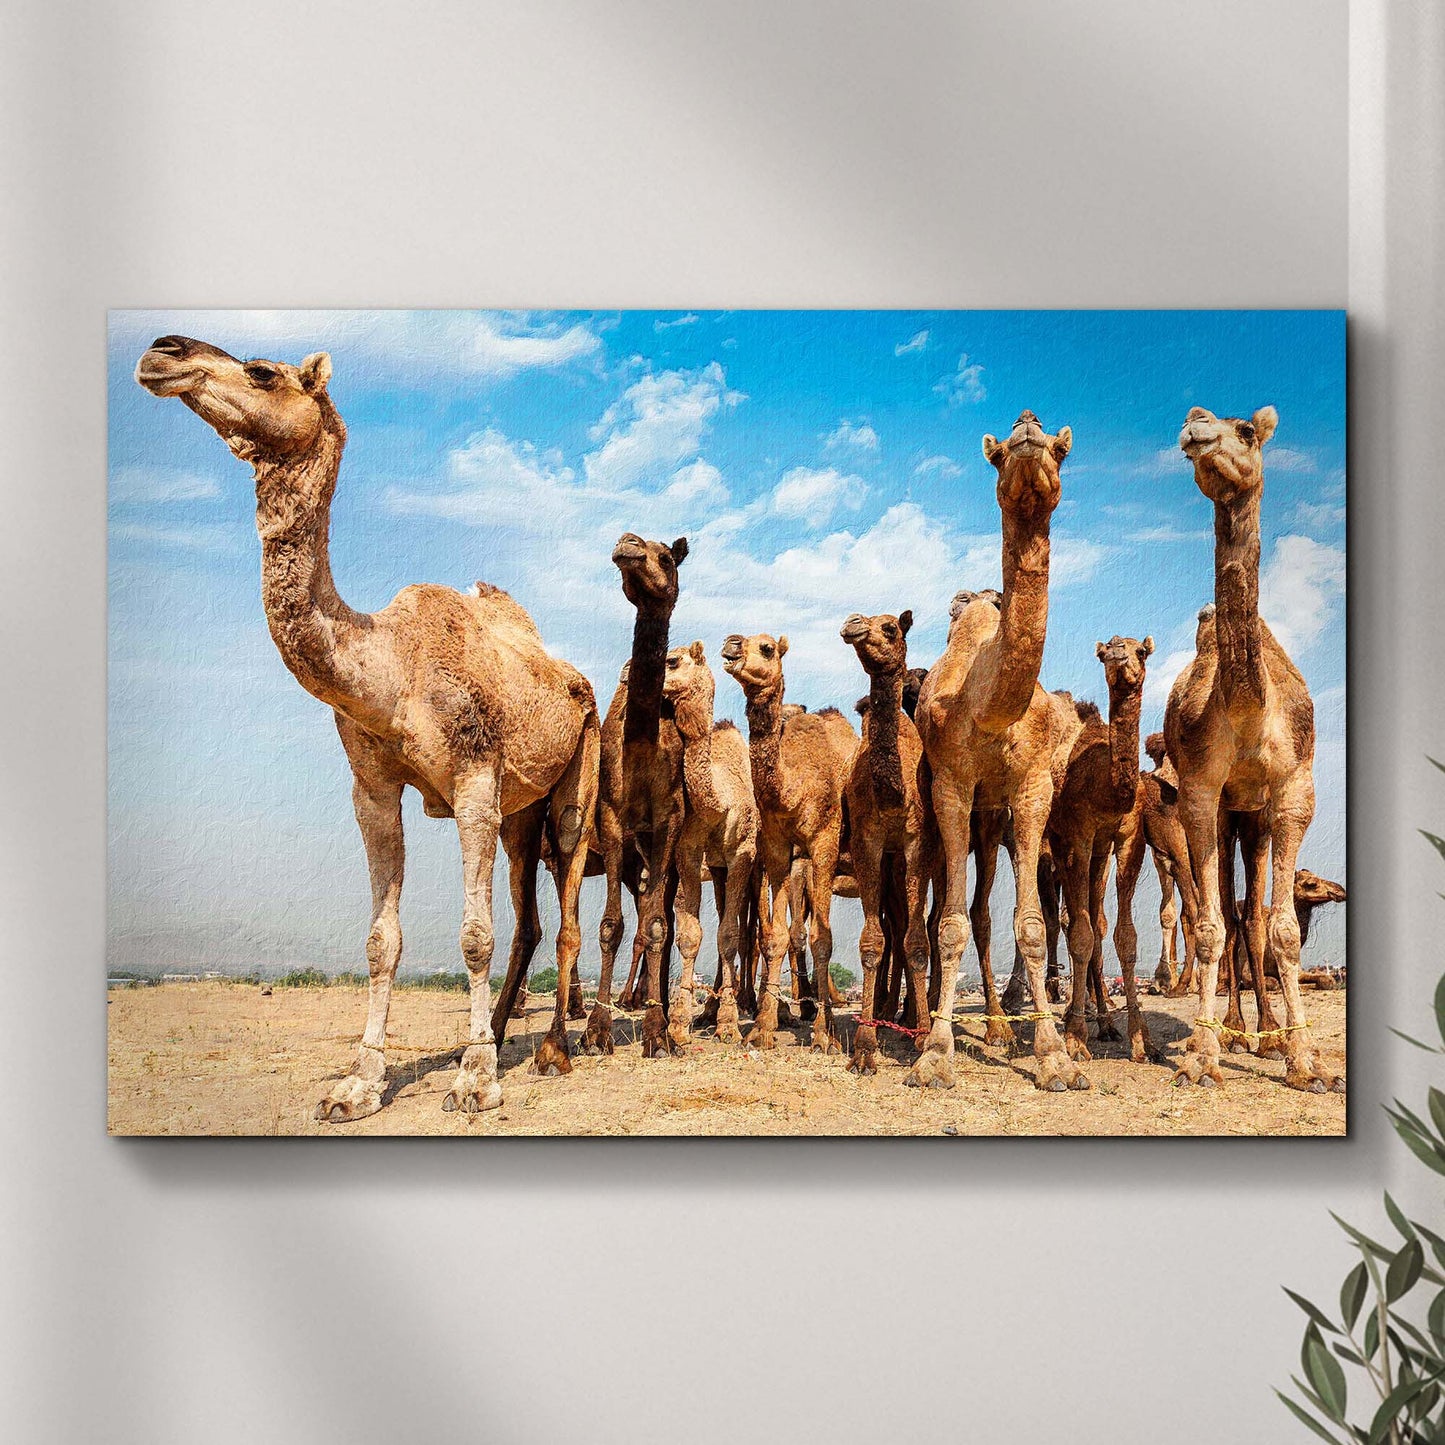 Tied Feet Camels Canvas Wall Art - Image by Tailored Canvases